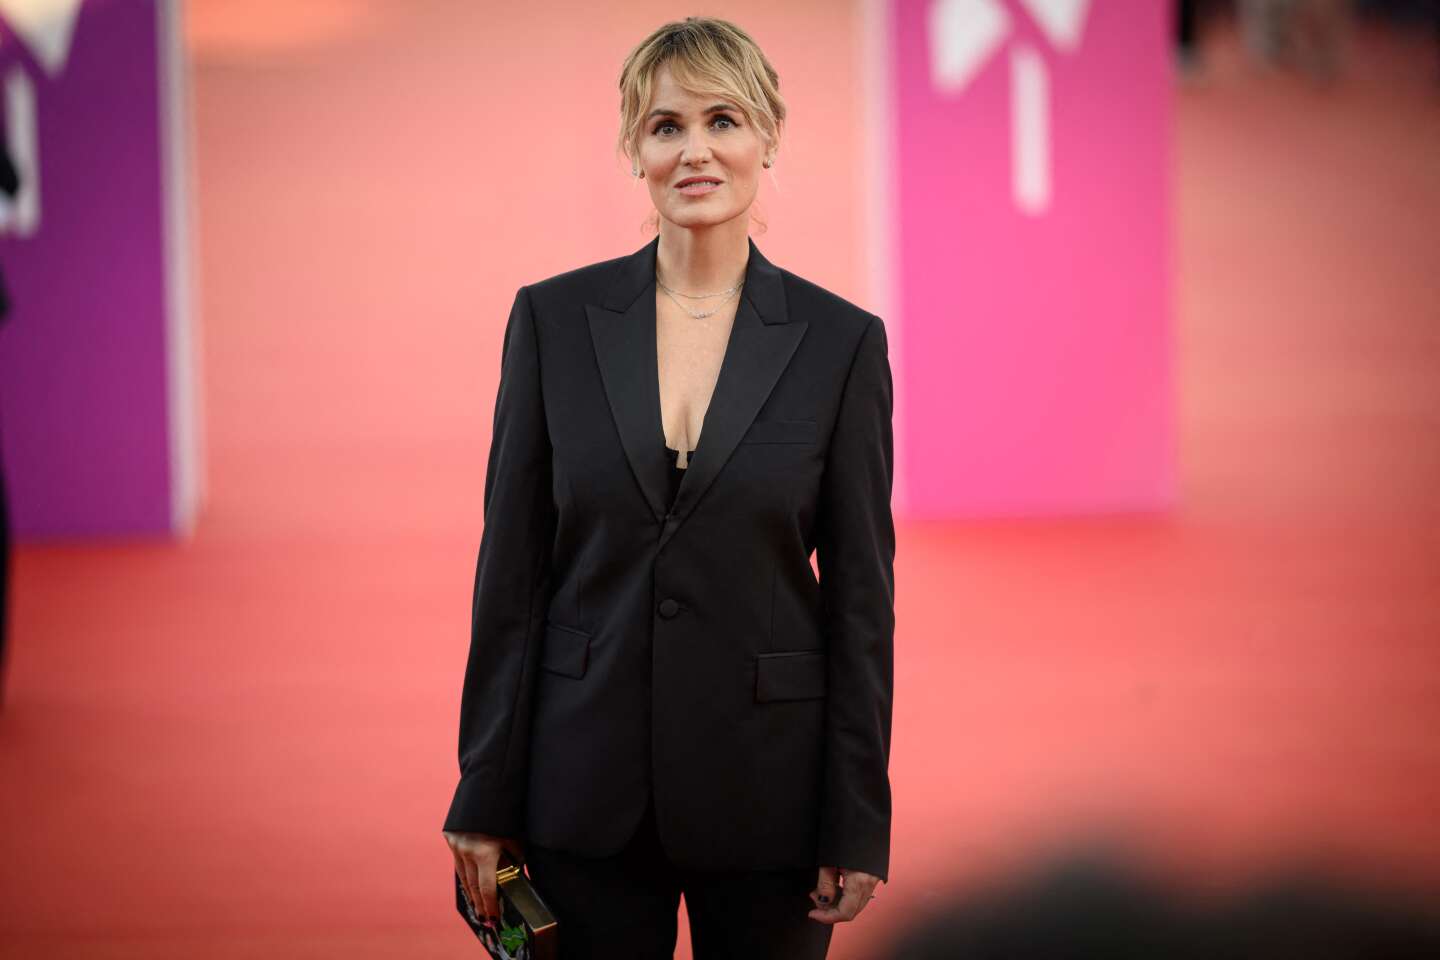 Hélène Frappat, writer: “All women, on the cinema screen which is real life magnified, are survivors”